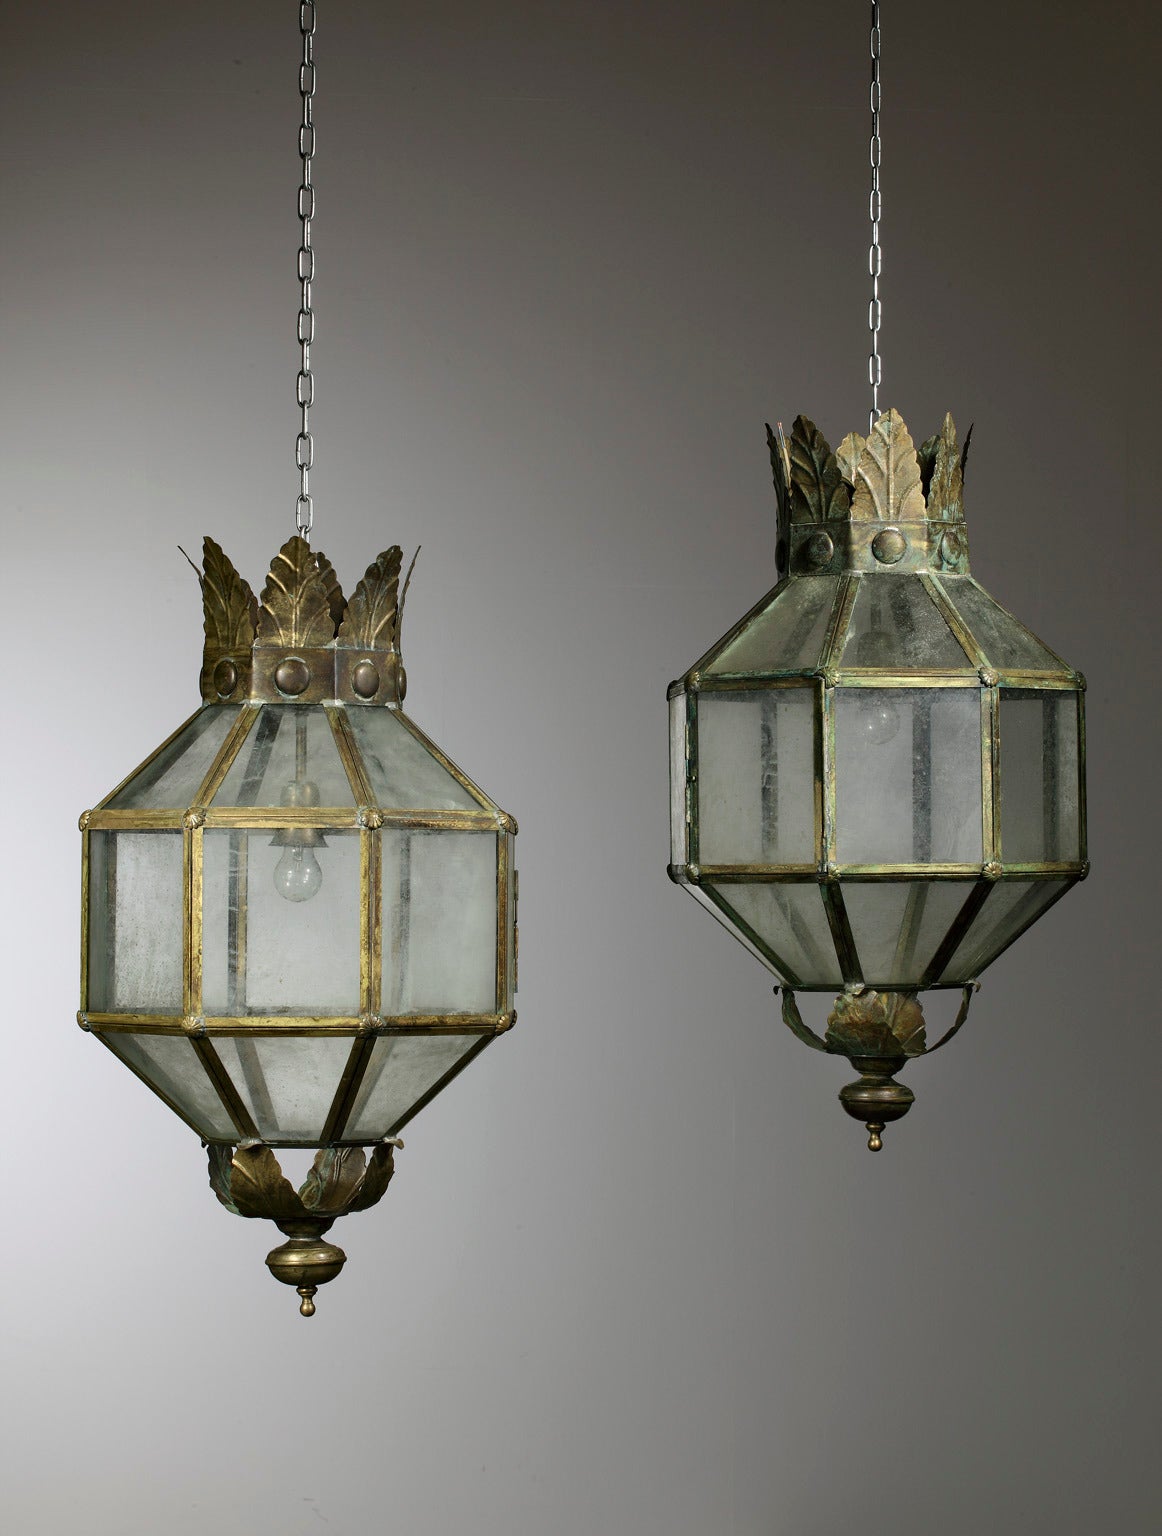 A pair of large aged copper and glazed octagonal section lanterns, each with pressed metal foliate cresting and waisted terminal, also available per piece.